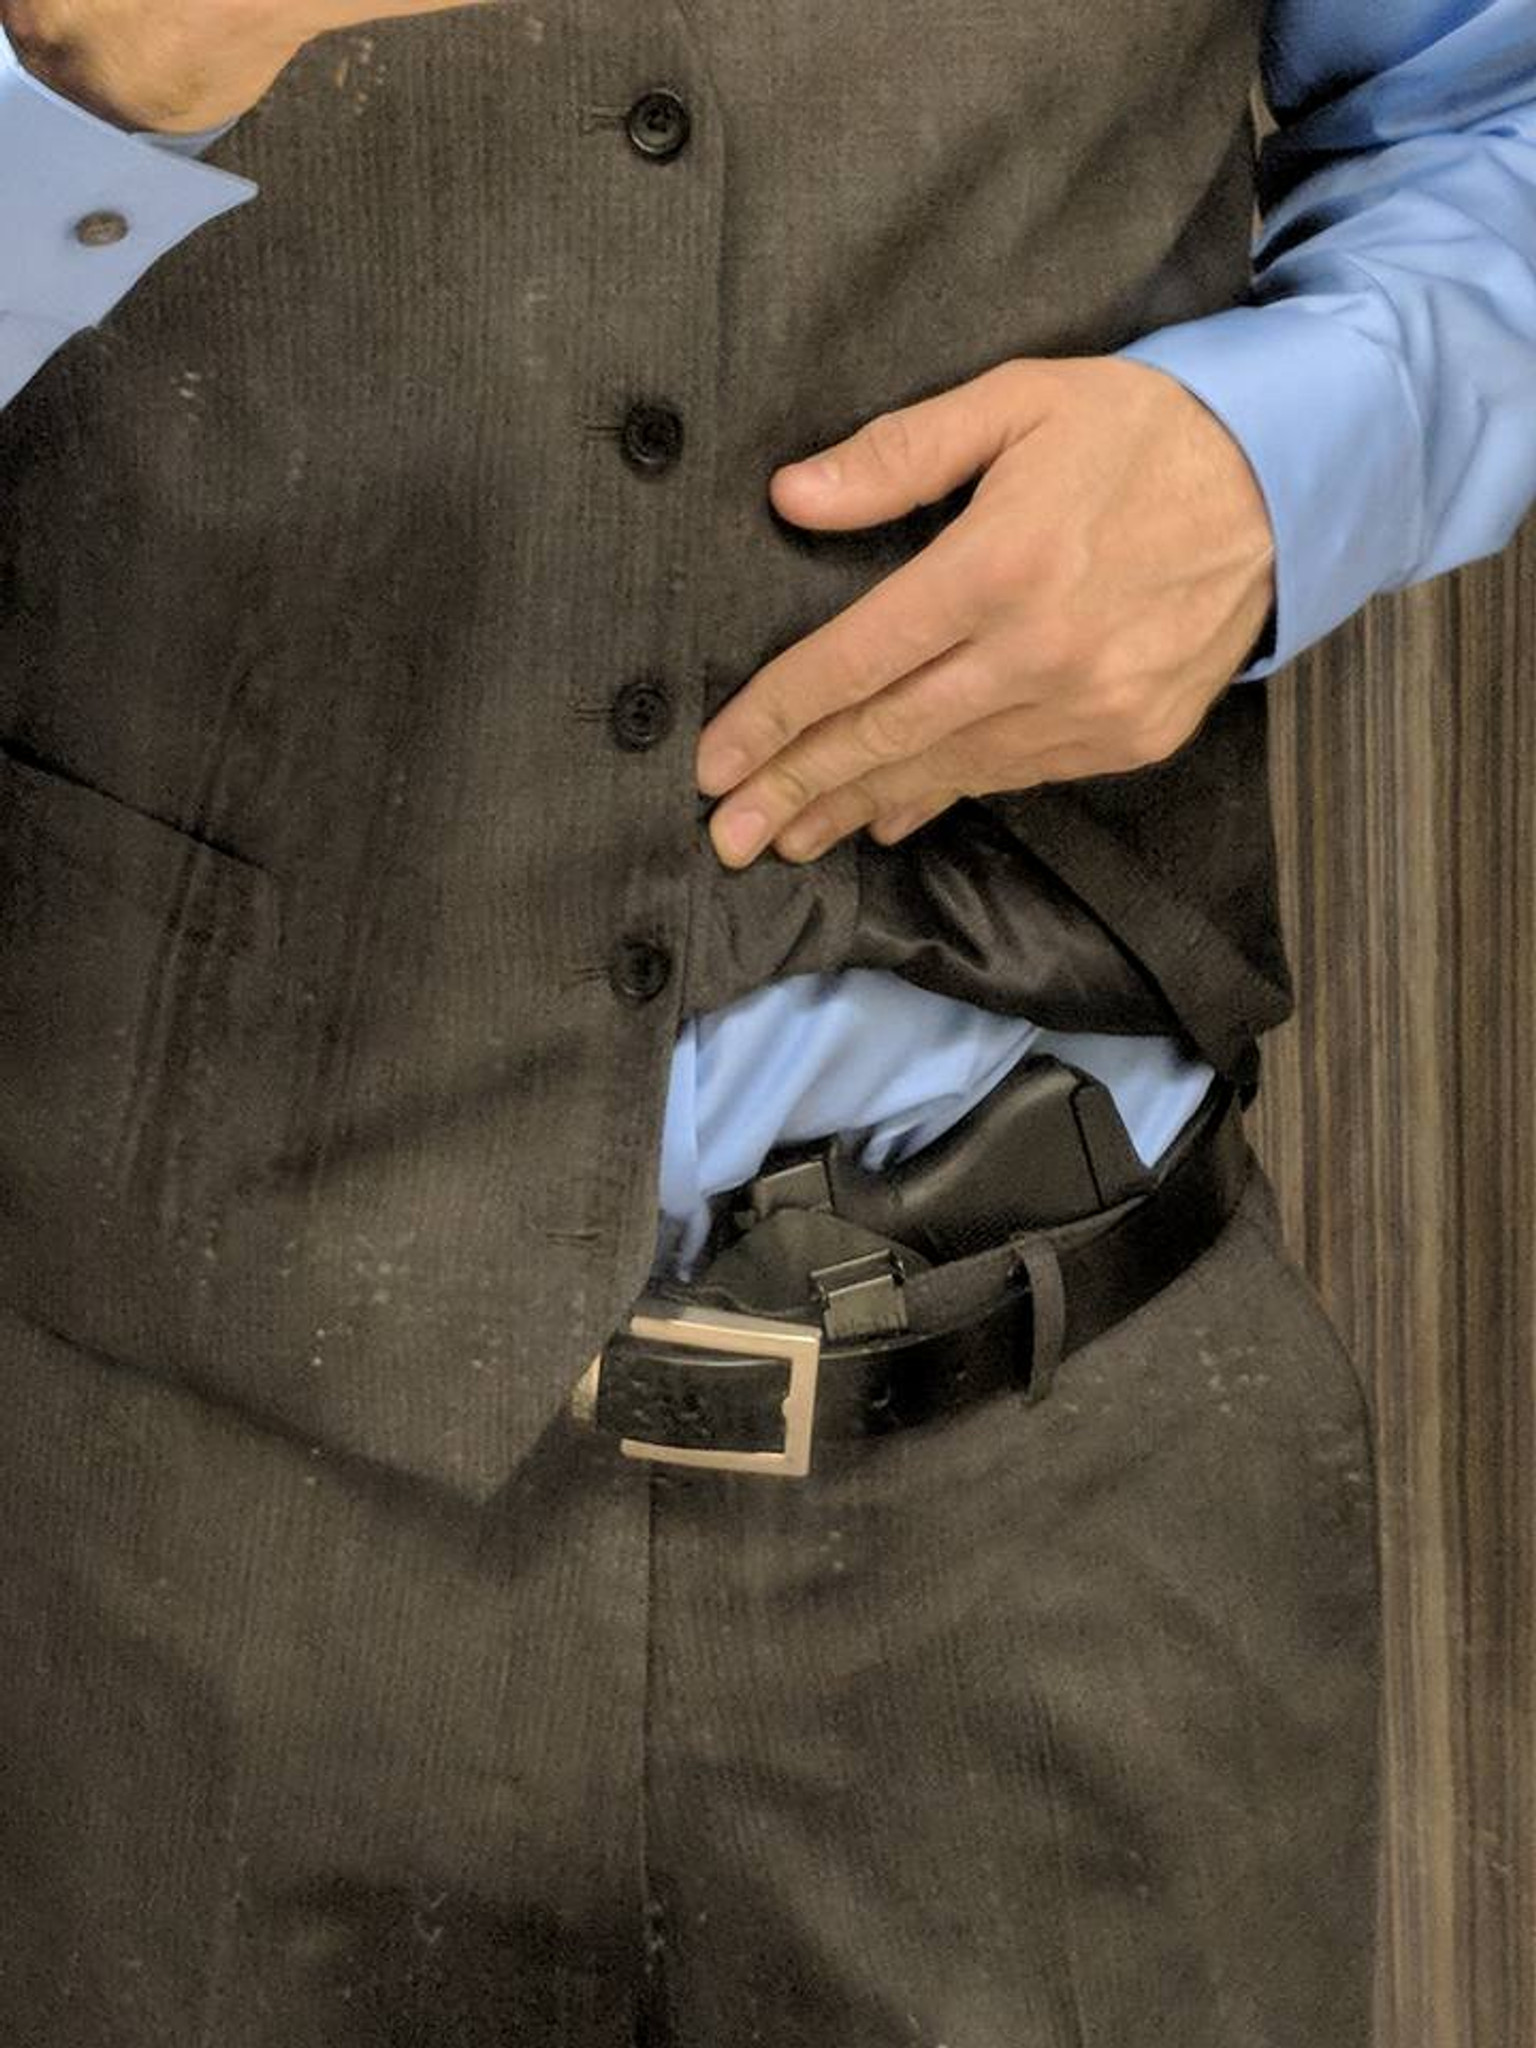 ULTICLIP XL Holster Clip for Belt Carry